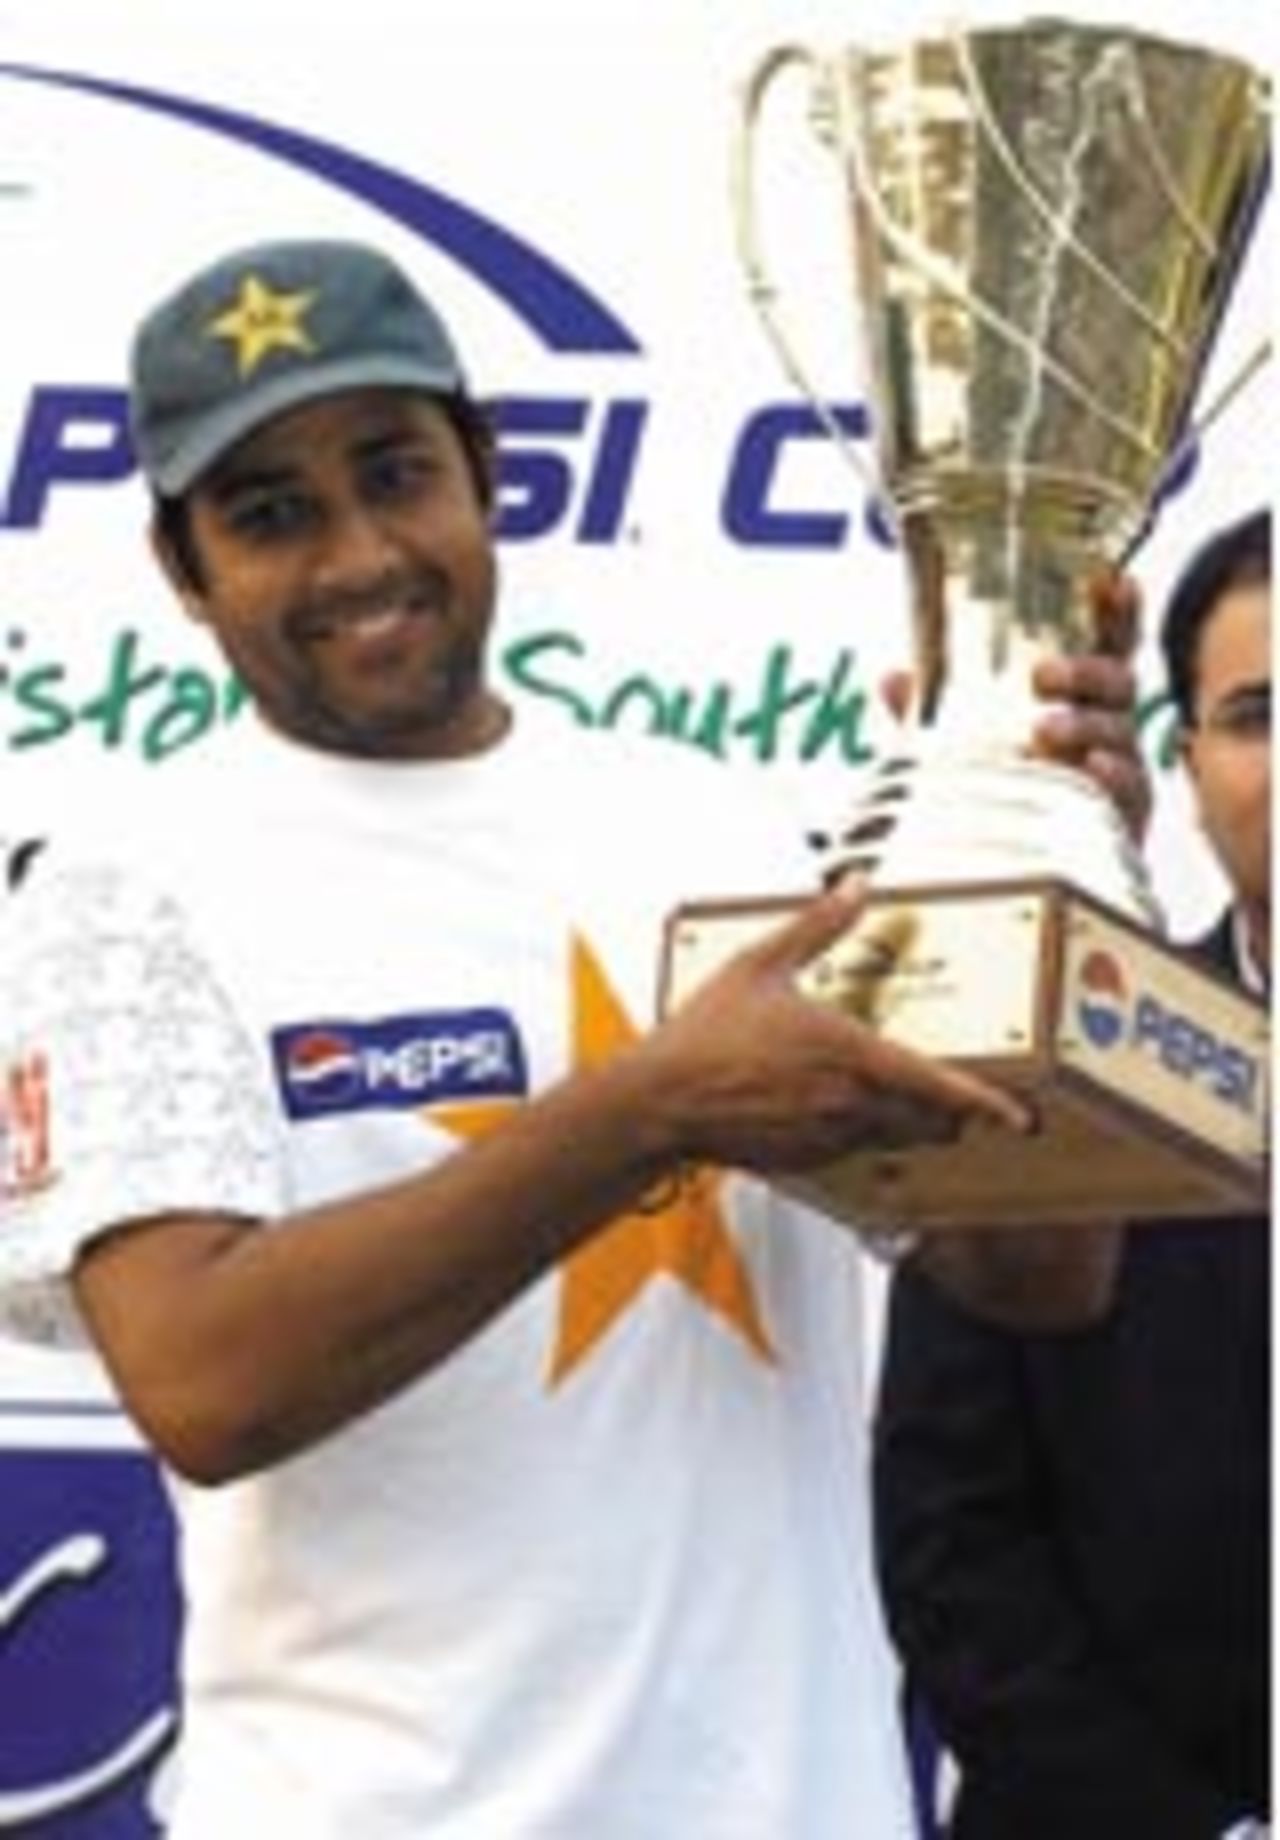 Inzamam-ul-Haq with the trophy after winning the two-Test series against South Africa 1-0, Pakistan v South Africa, 2nd Test, Faisalabad, 5th day, October 28, 2003